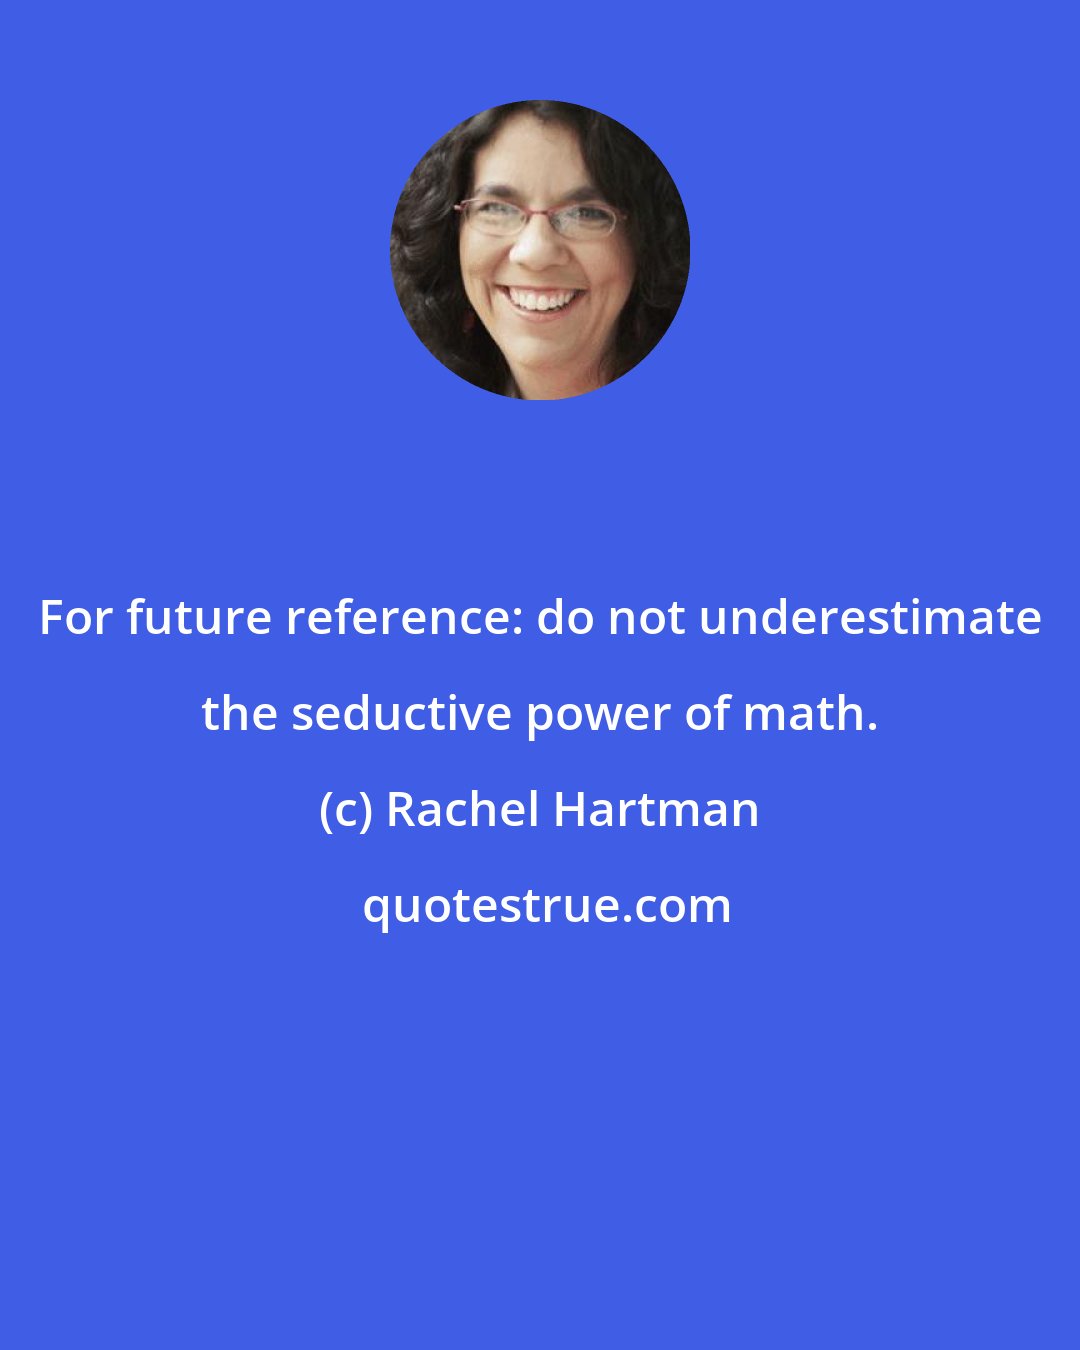 Rachel Hartman: For future reference: do not underestimate the seductive power of math.